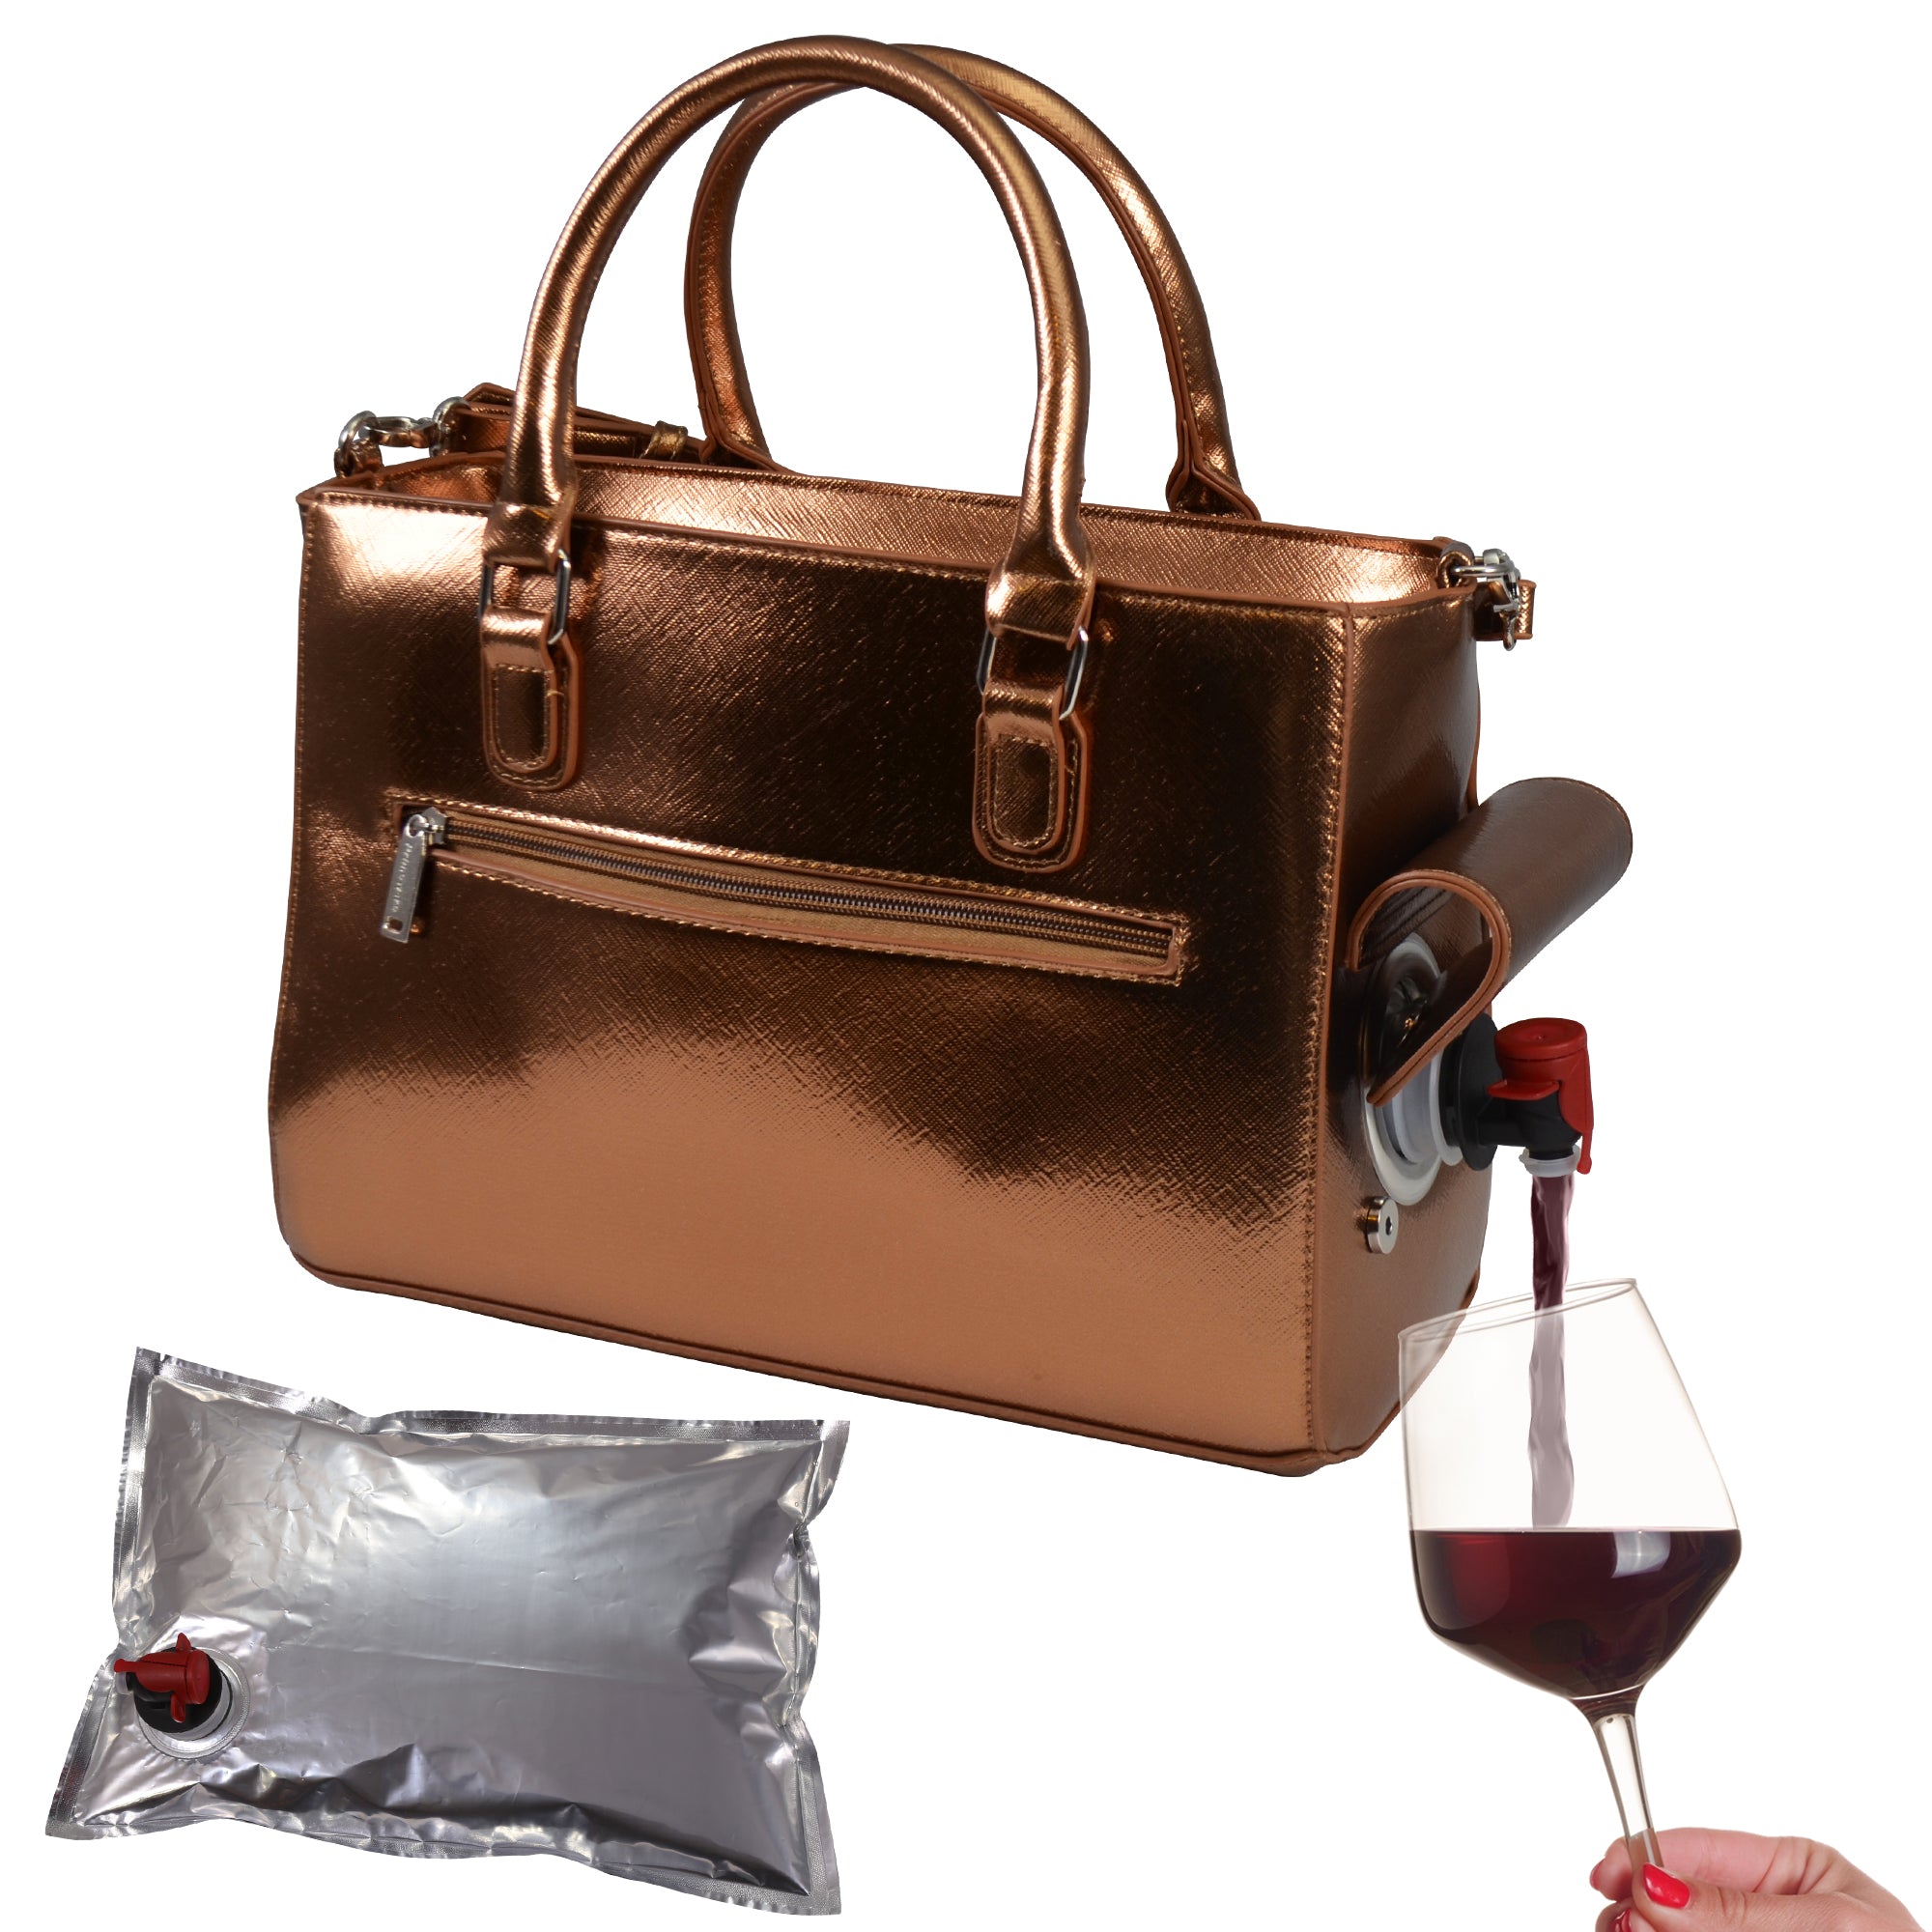 Kmart has released a handbag with a secret in-built wine dispenser | Better  Homes and Gardens